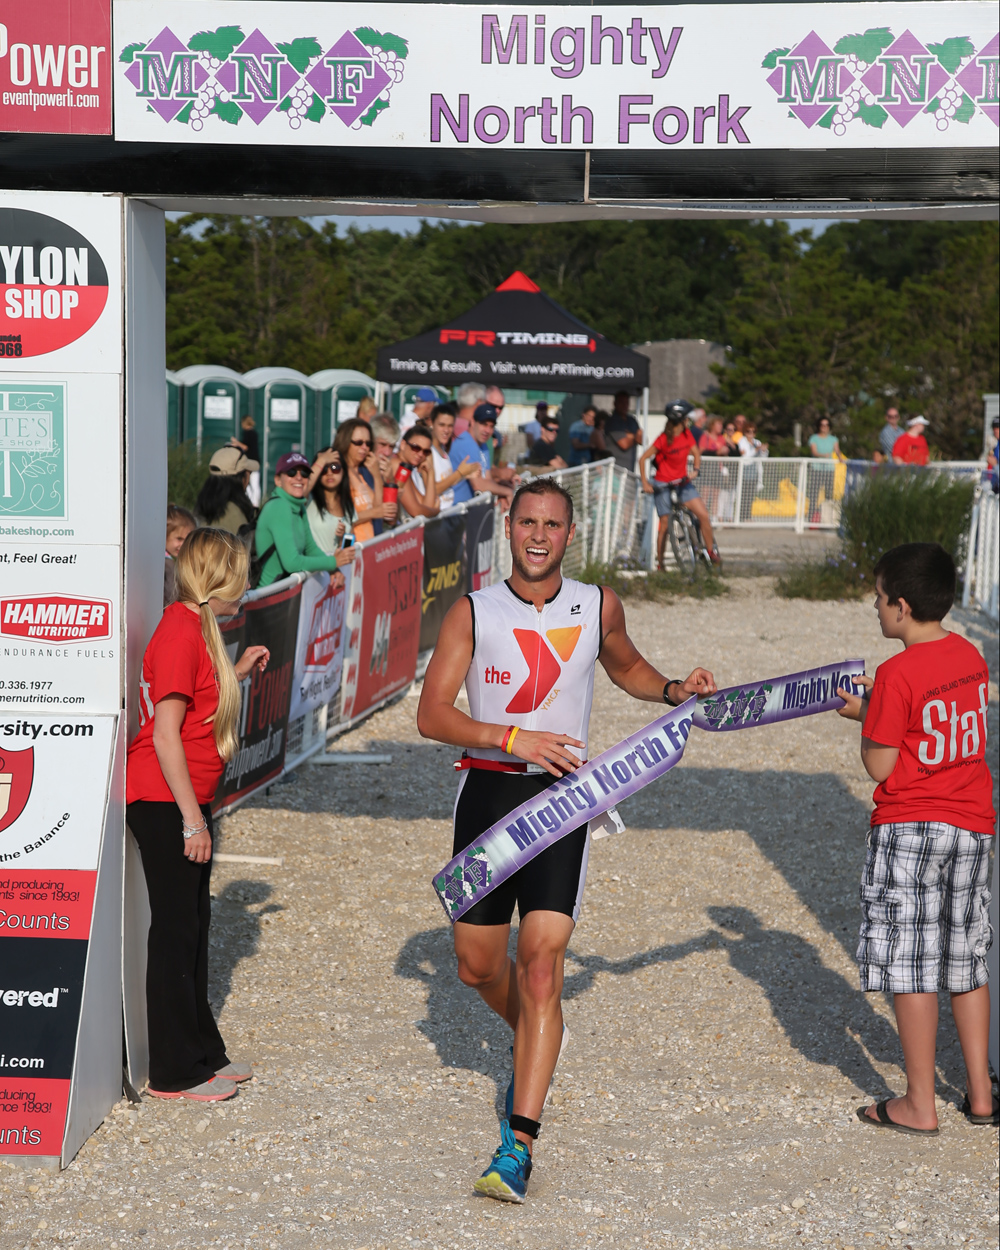 Tim Steiskal of Brookhaven was the winner of the Mighty North Fork Triathlon with a time of 46:36. The event was held at Cedar Beach in Southold Sunday. (Credit: Daniel De Mato)